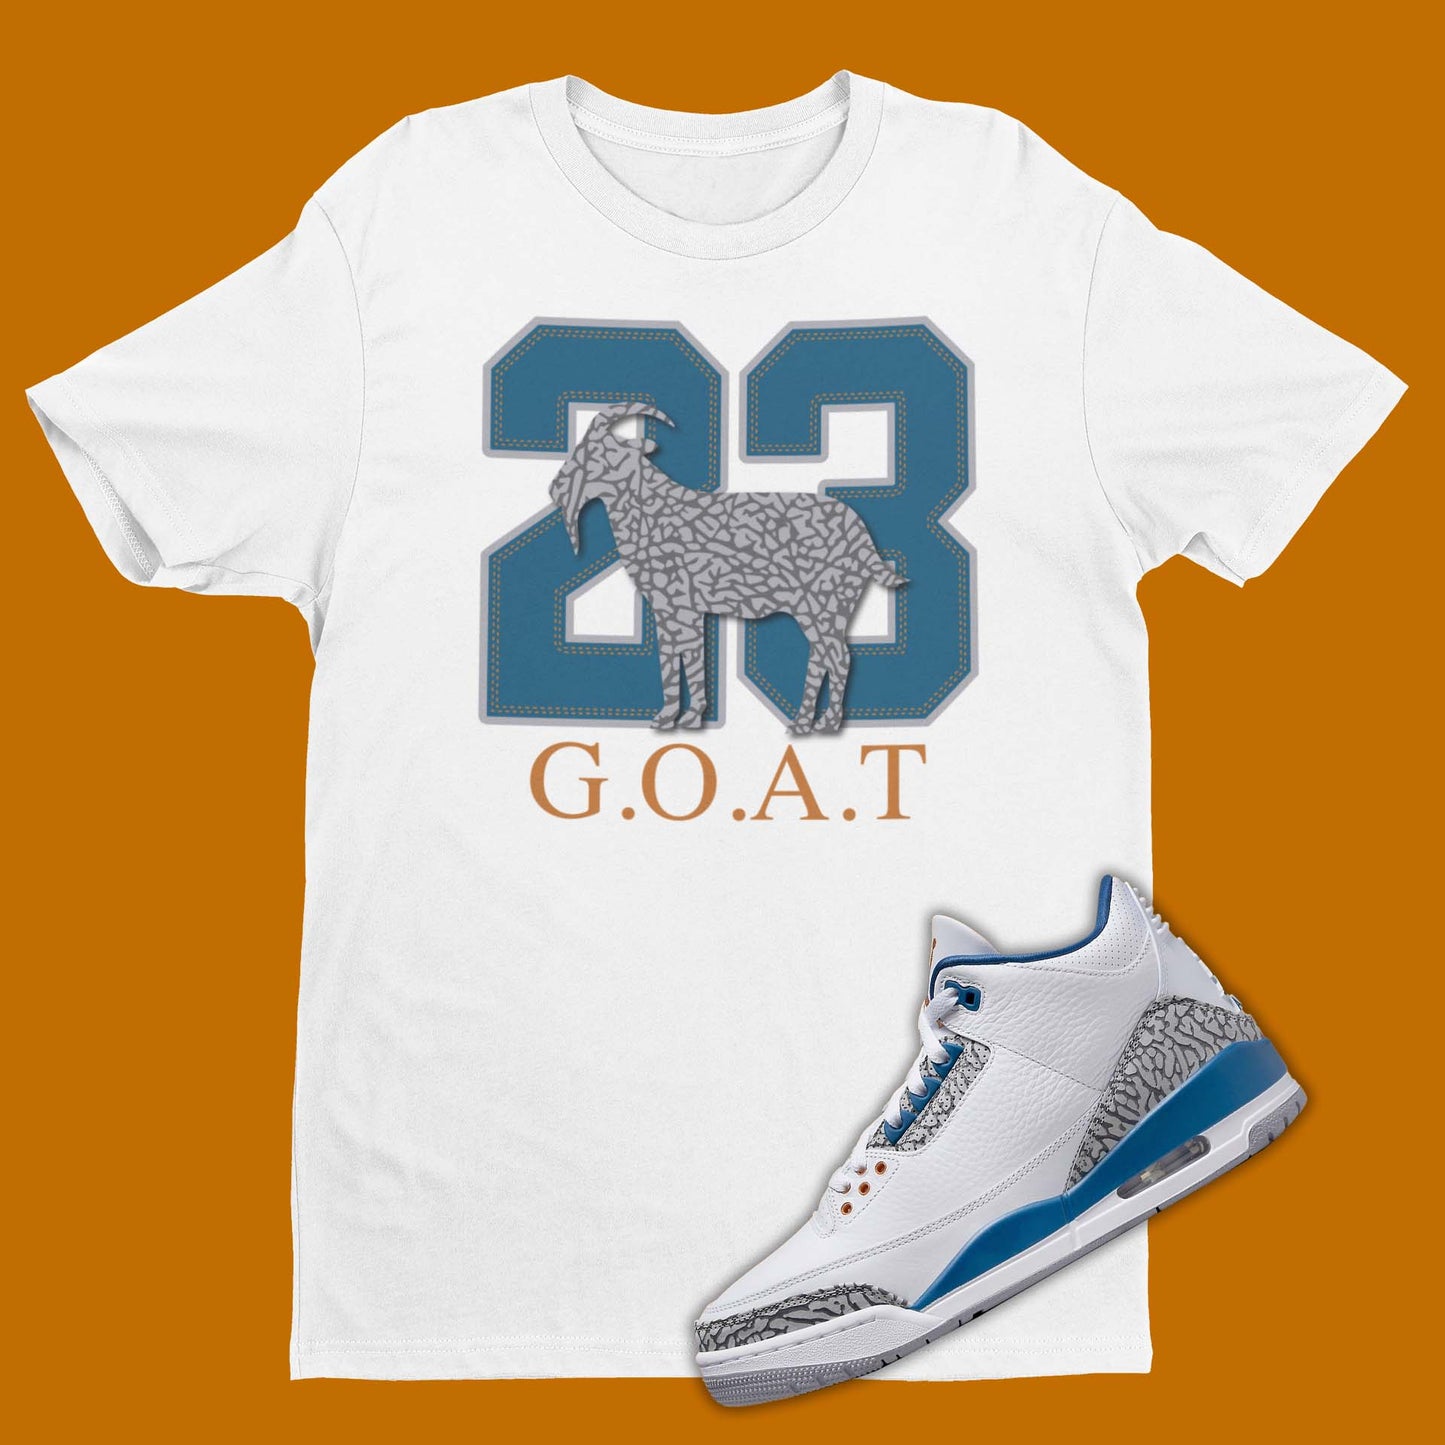 The perfect 23 GOAT shirt to match your sneakers! Our Match Jordan 3 t-shirt is made to compliment your kicks. Bring your sneakers to the next level with this Wizards Air Jordan 3 shirt. Match and feel trendy with this graphic tee!